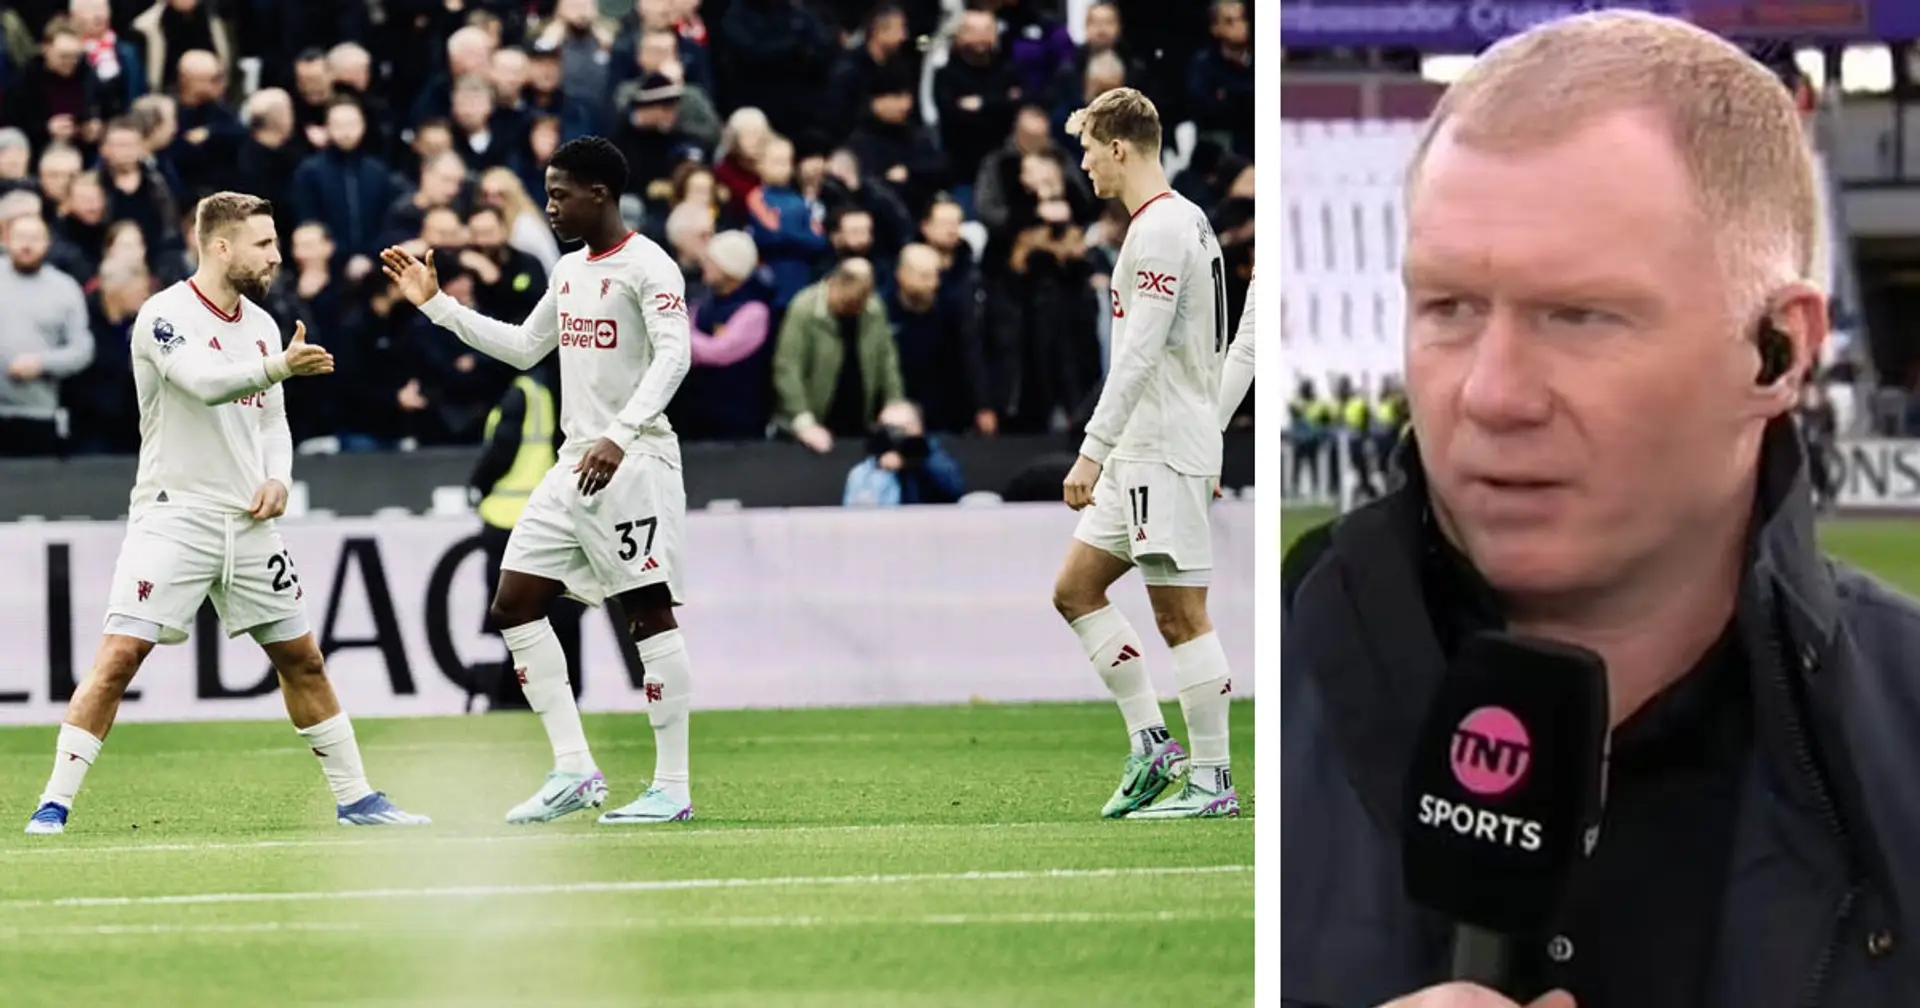 'He was very controlled': Paul Scholes names Man United player who impressed him vs West Ham